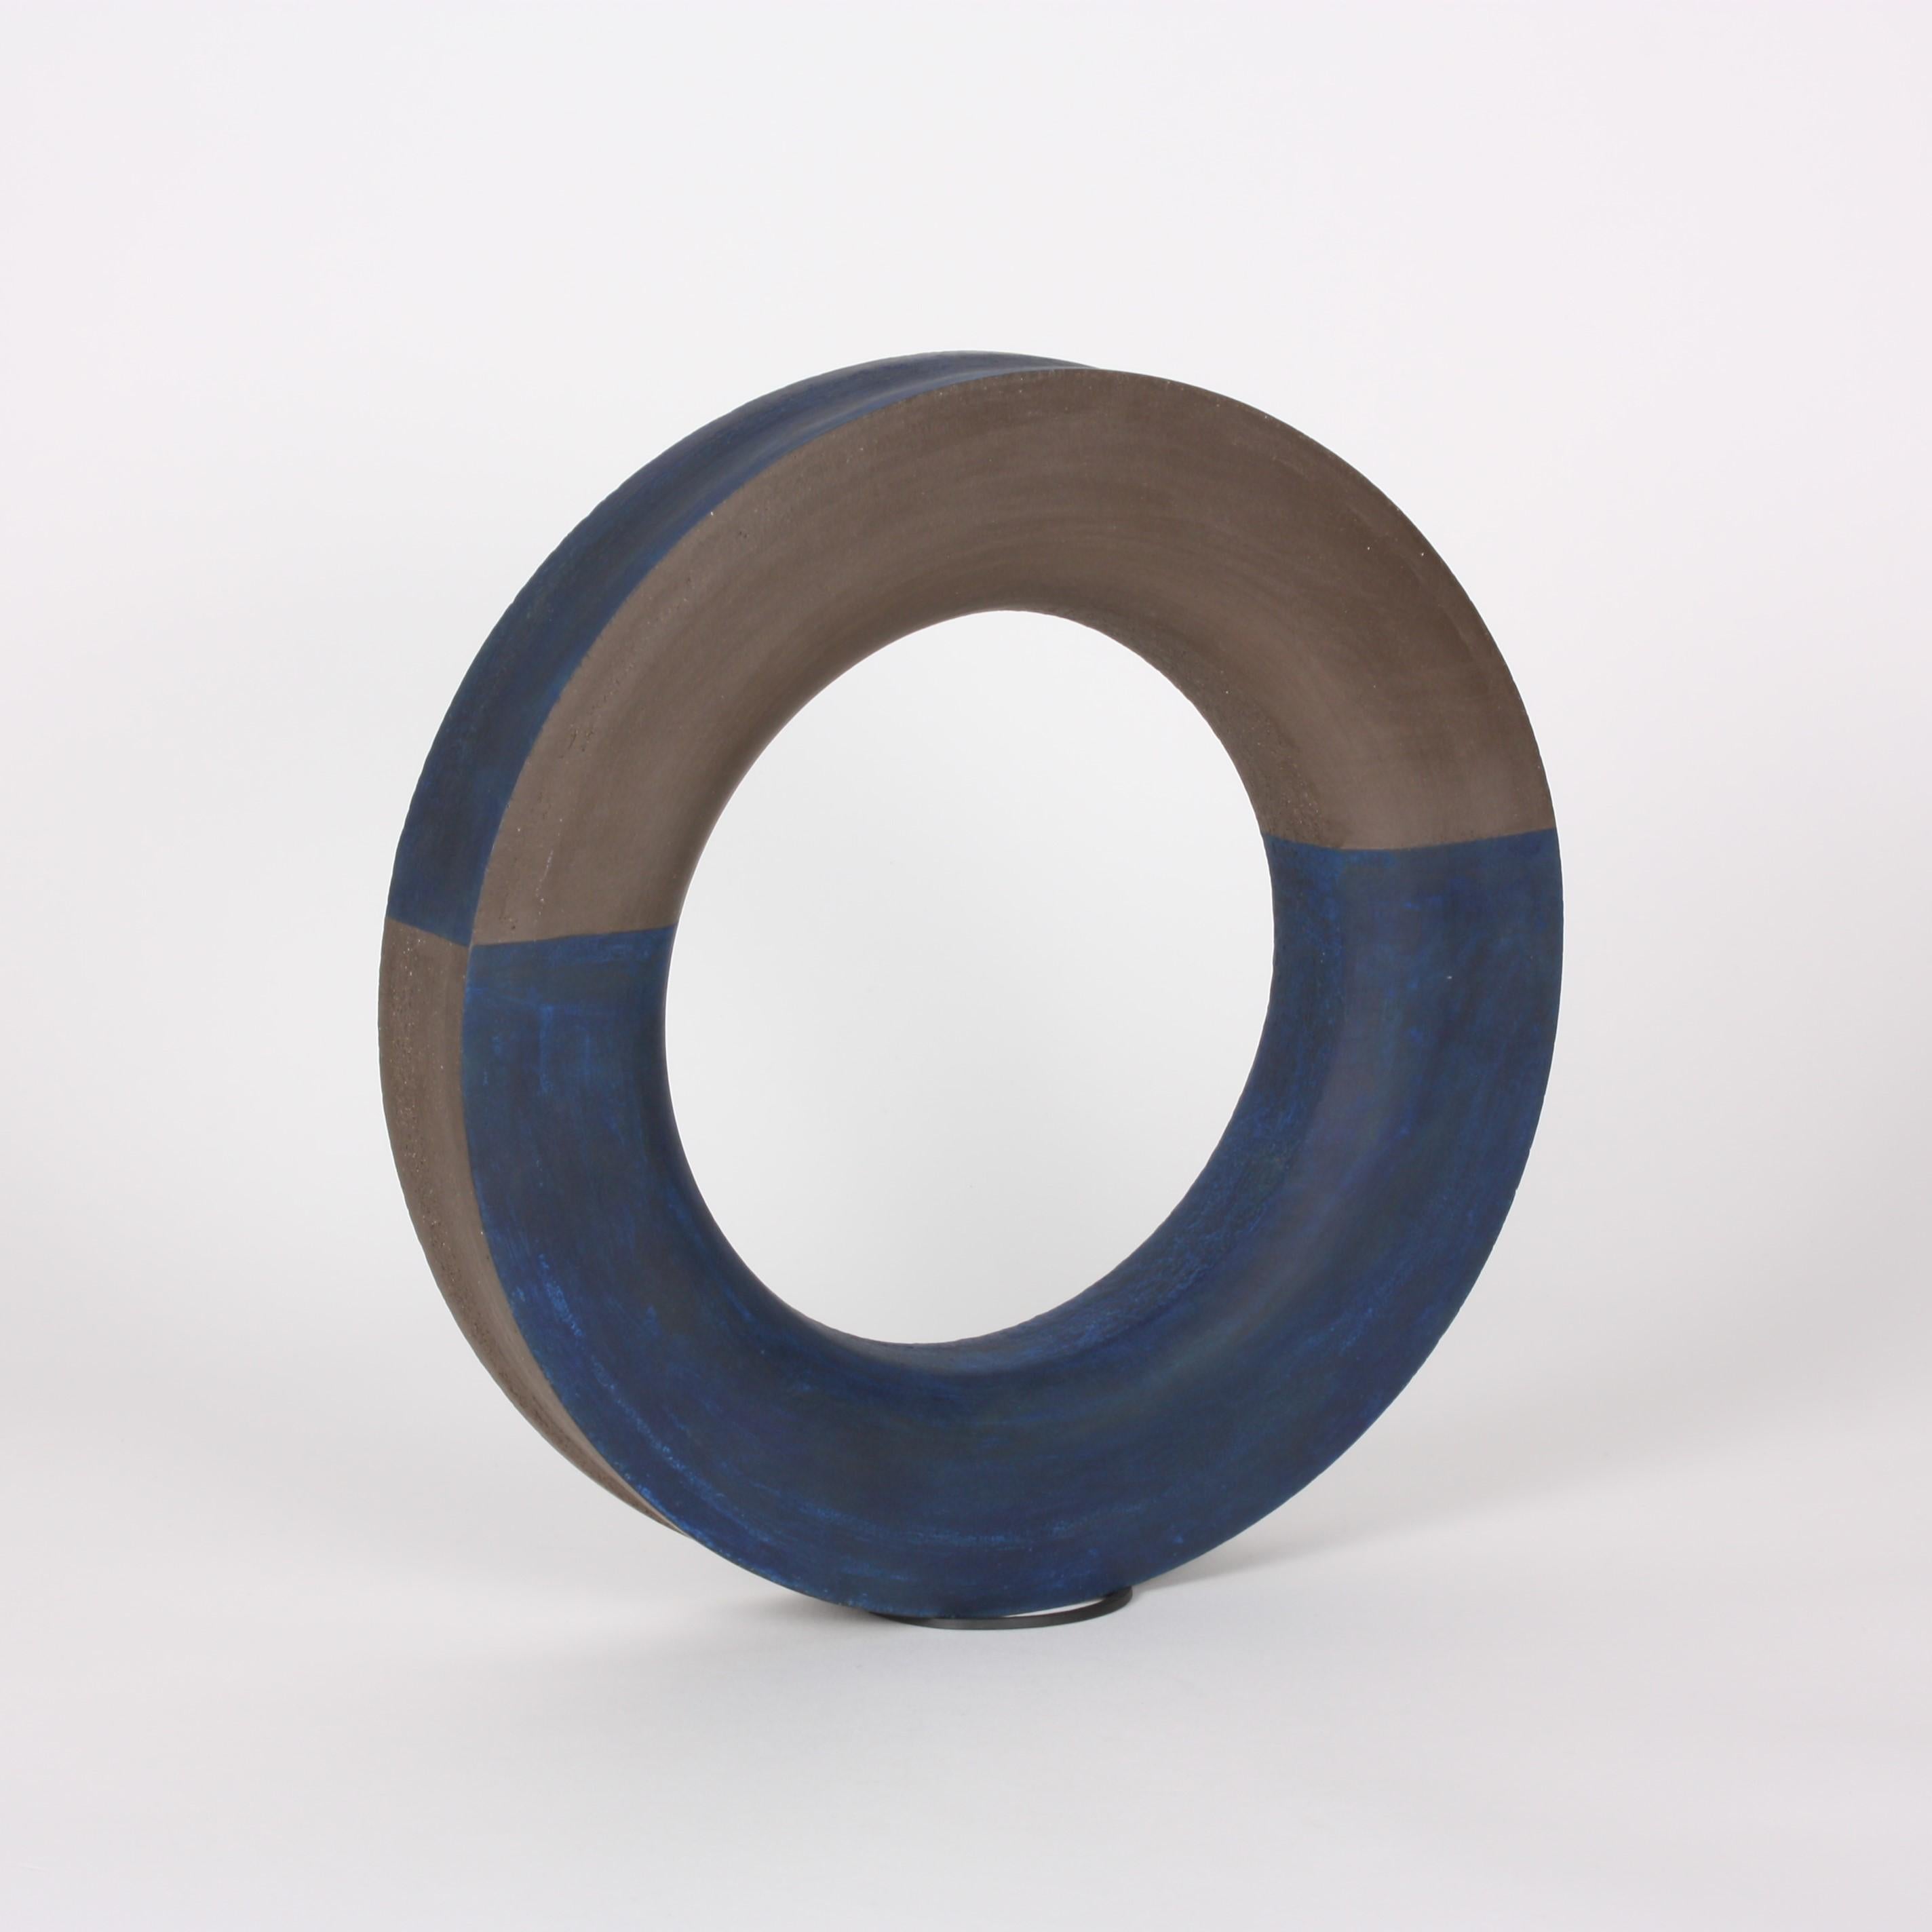 Contemporary ceramic ring sculpture in a rich cocoa/velvety brown stoneware vibrates with accents of blue slip along the outer rim and on the smooth bottom arch. Wheel-thrown sculpture, 27 cm in diameter.

One-of-a-kind.

Signed by the